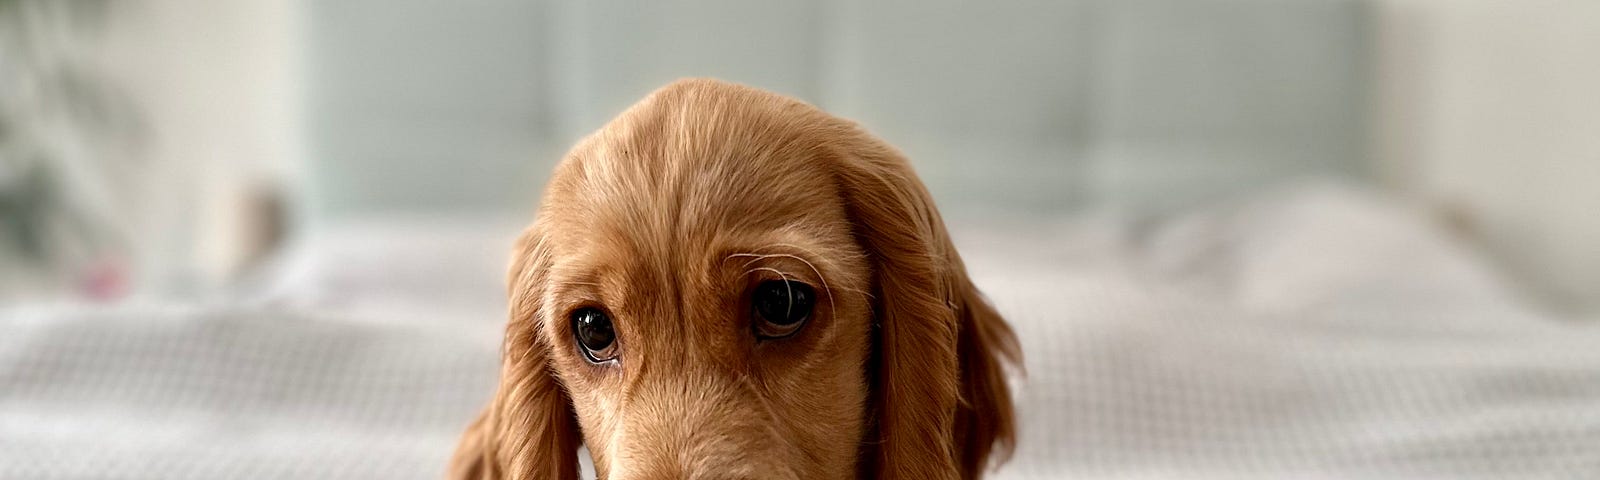 A photo of a red cocker spaniel puppy